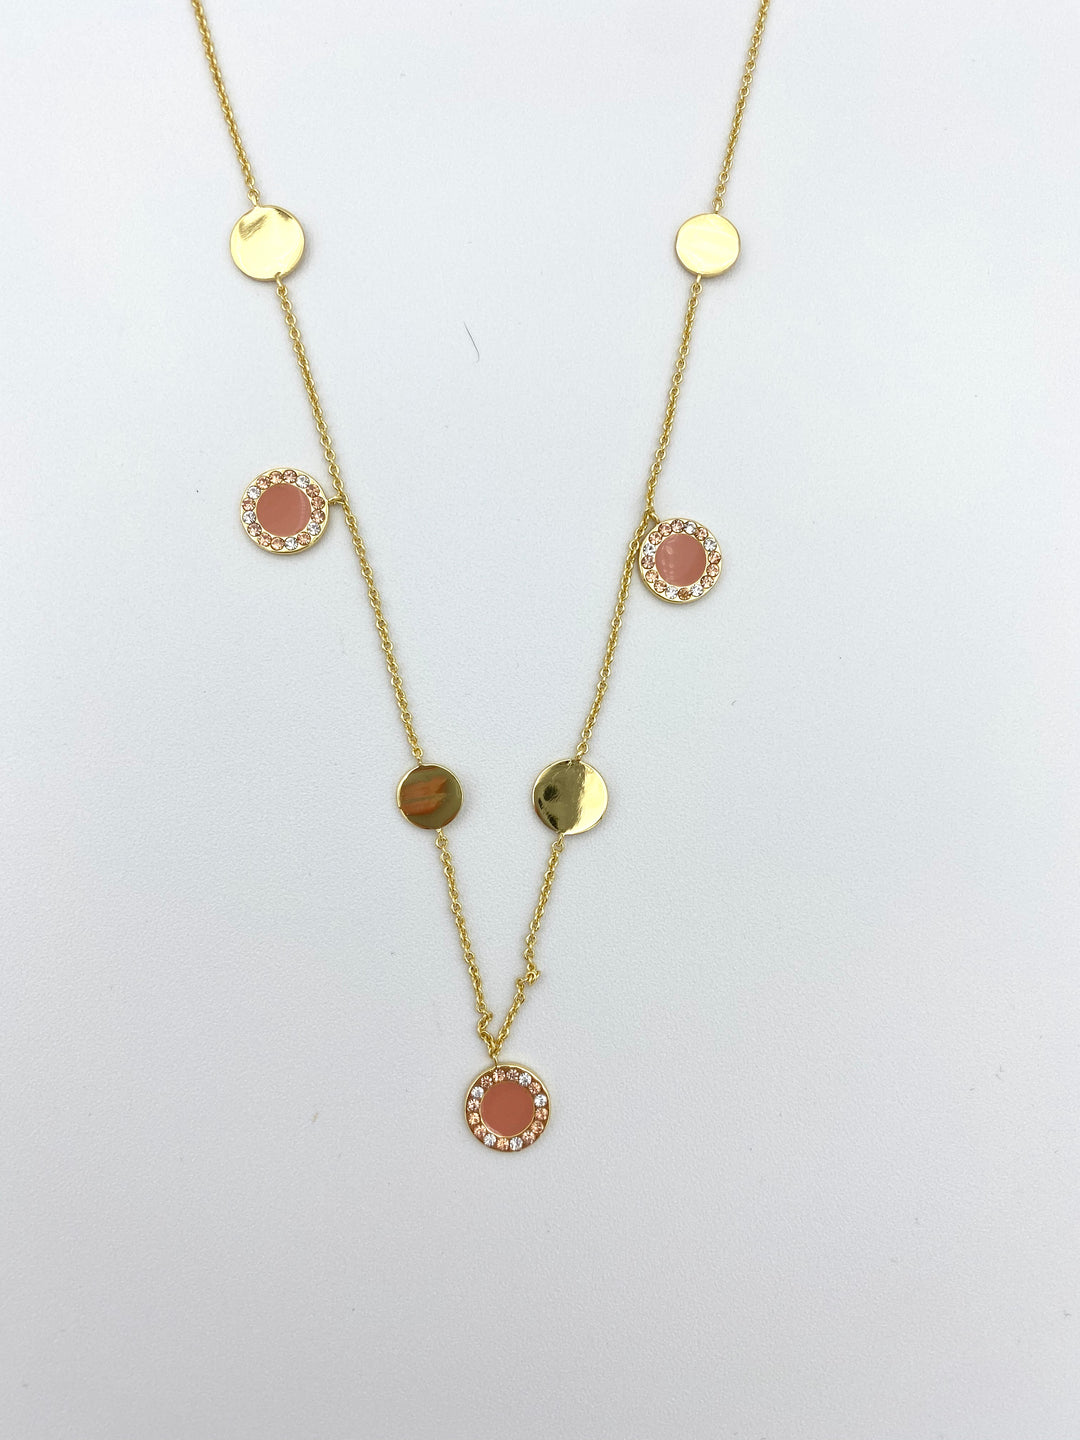 Gold Necklace With Circular Pink Charms